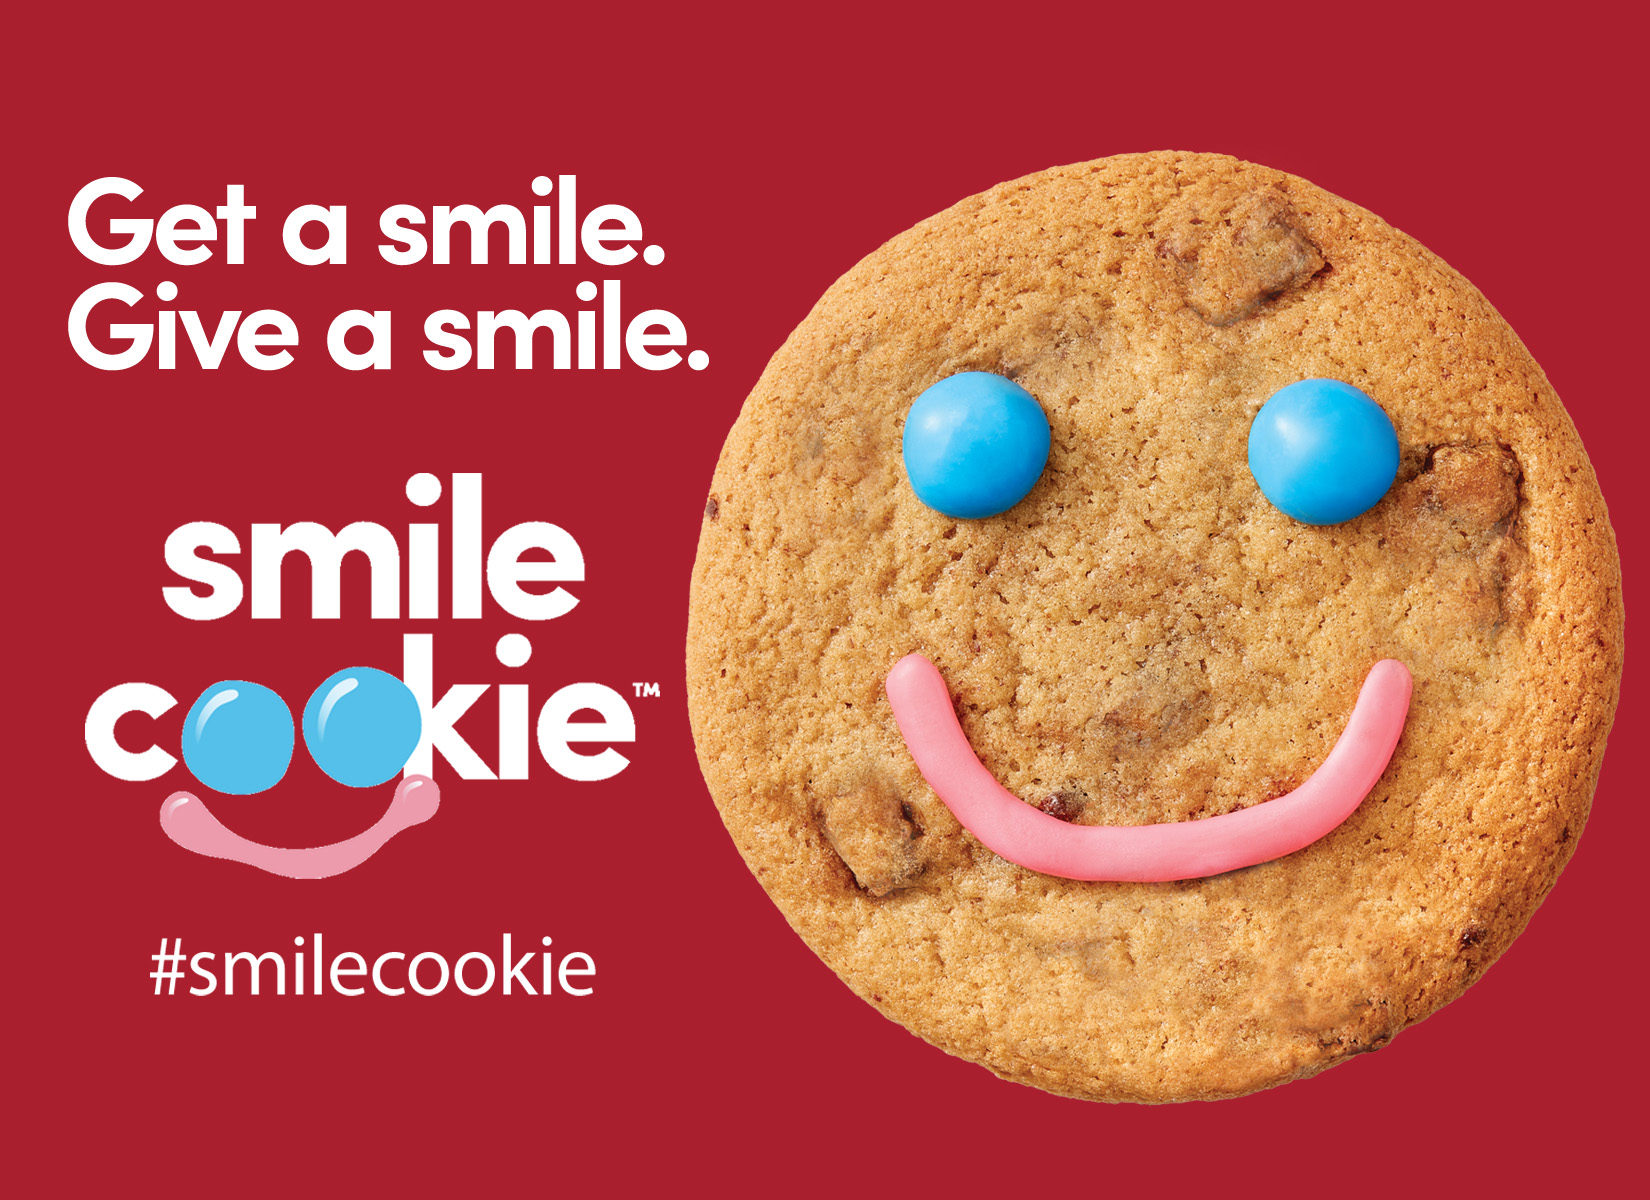 Smile Cookie Image for the Press Release